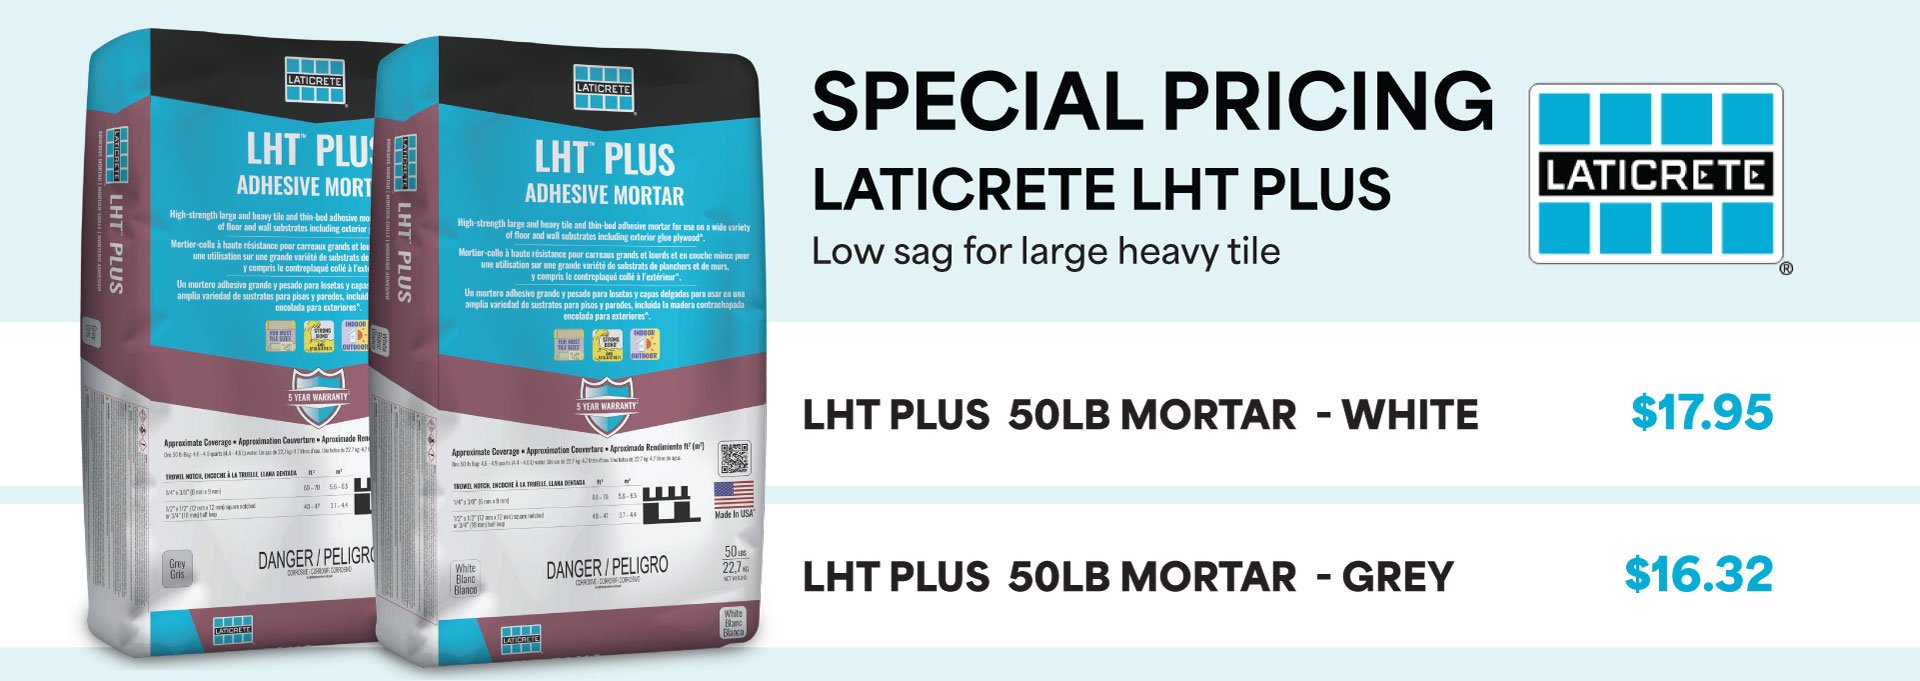 LHT Plus Special Pricing